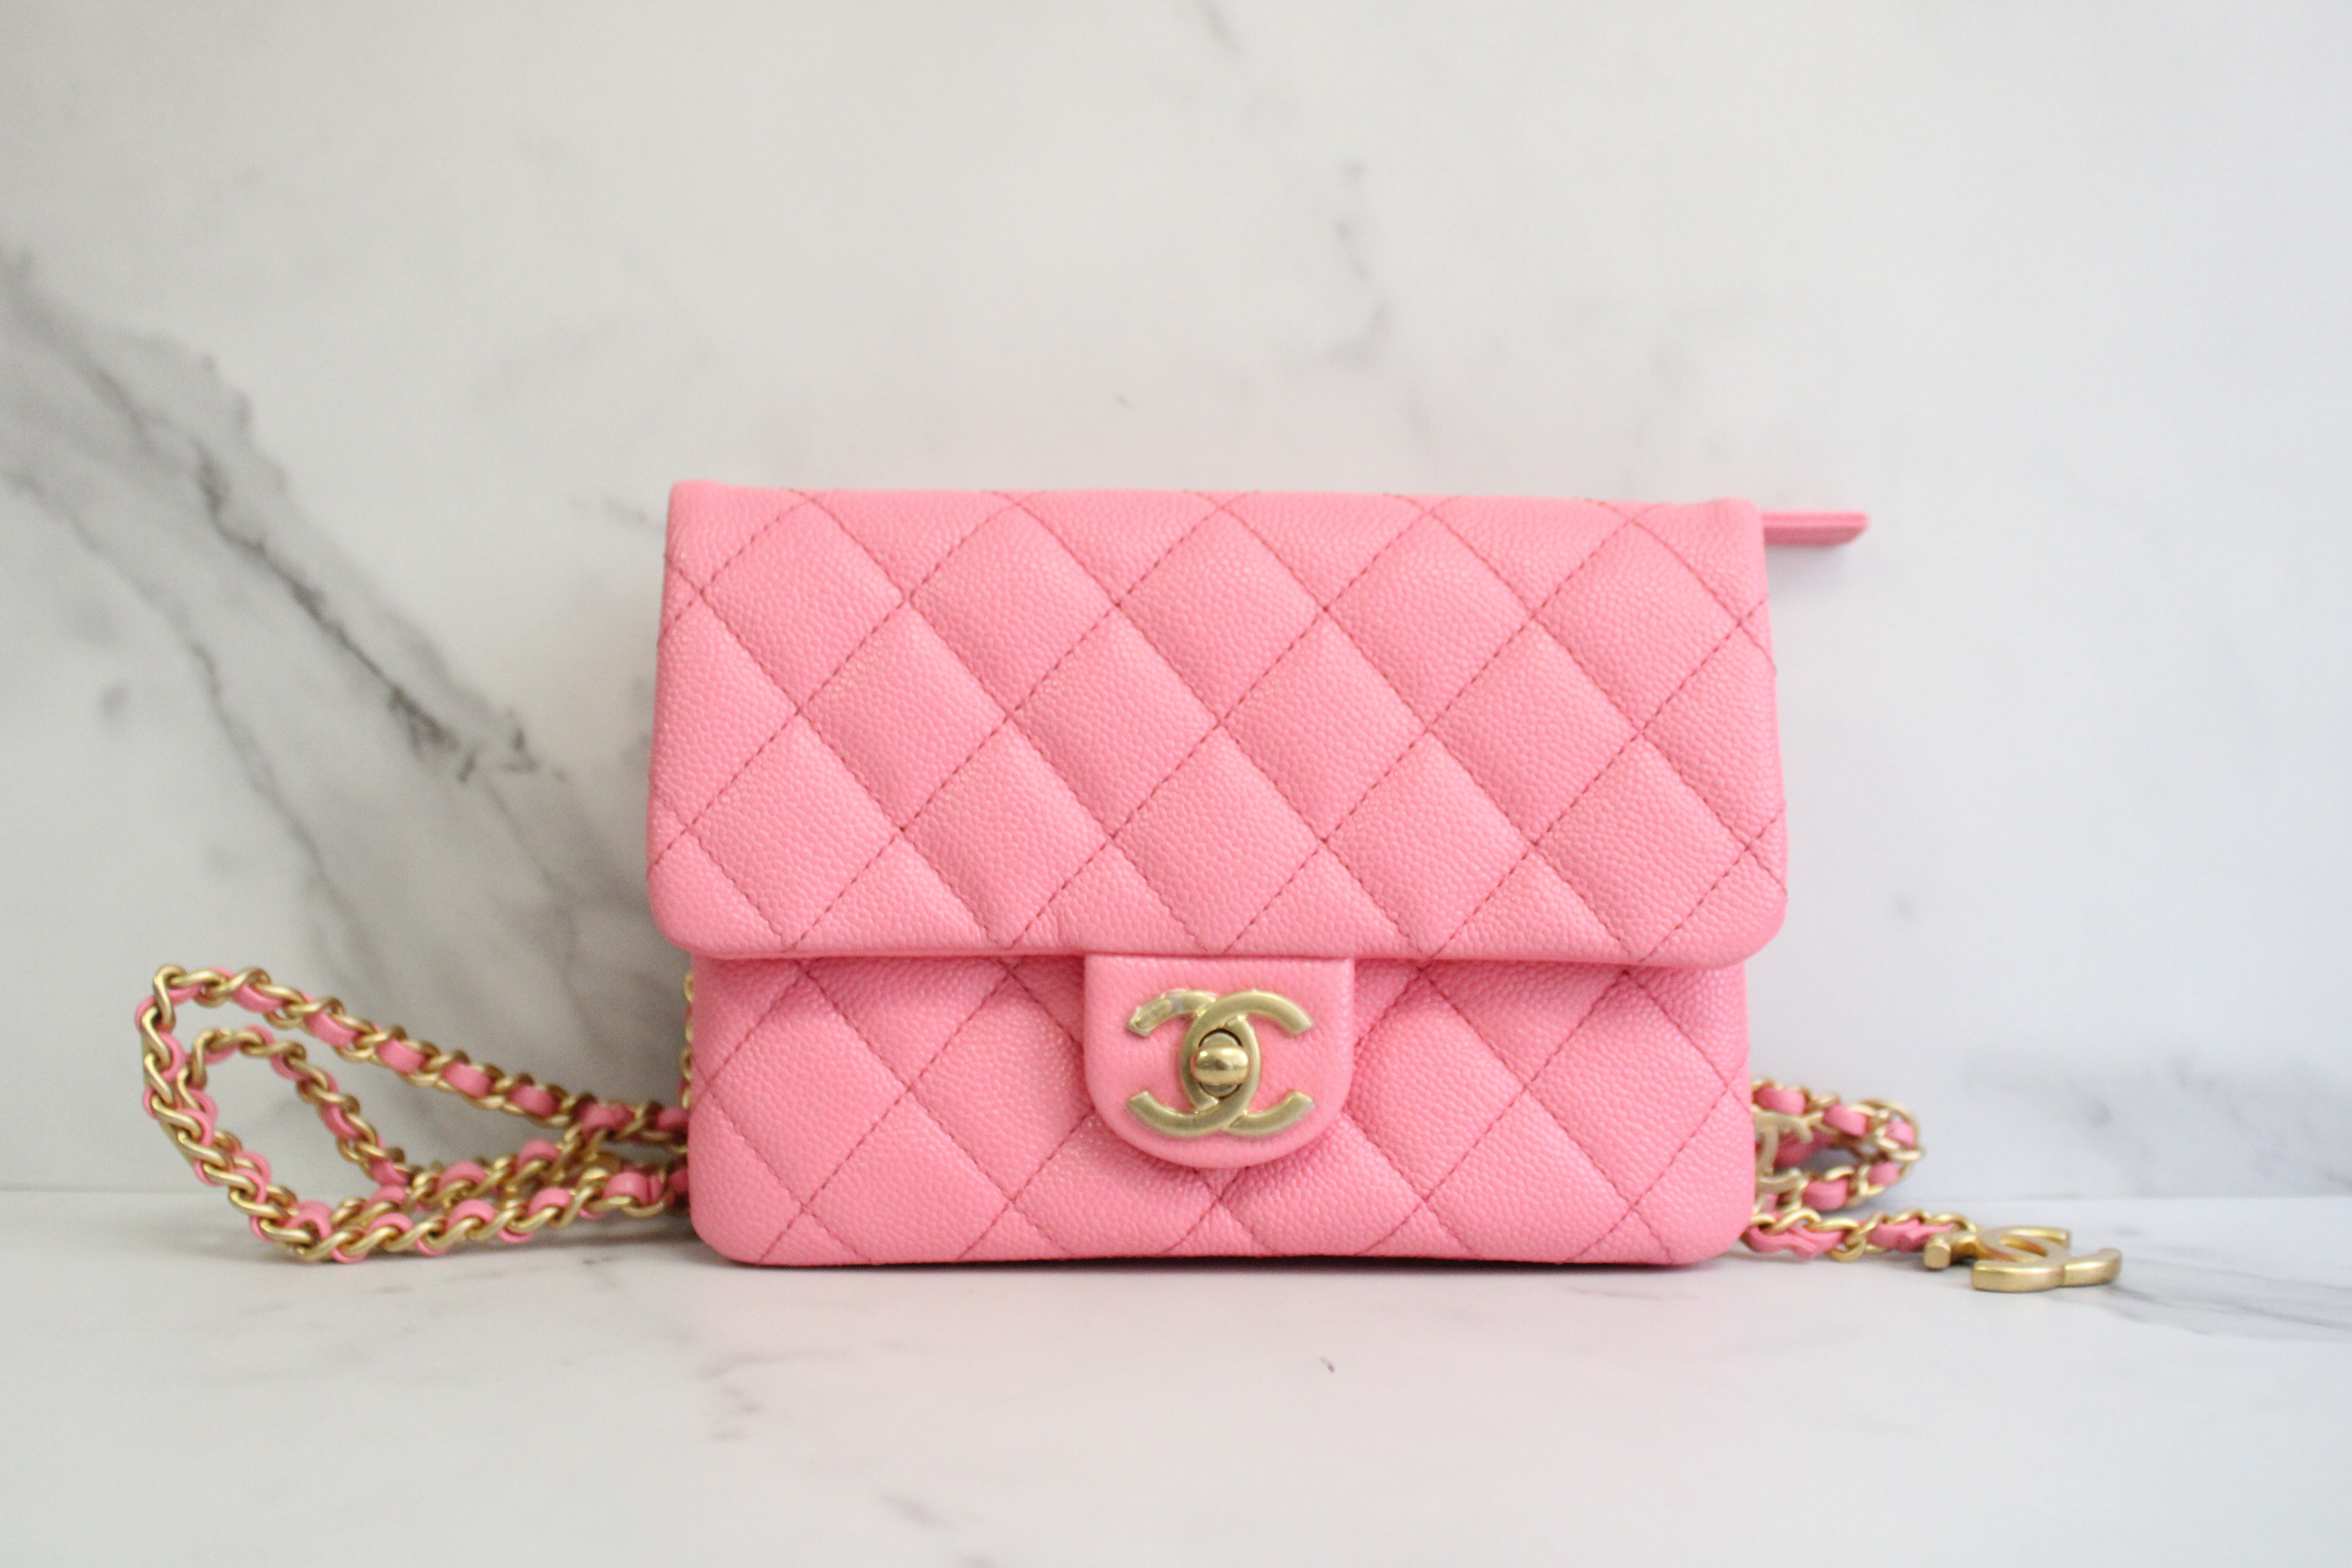 Chanel Waist Belt Bag, Pink Caviar Leather with Gold Hardware, New in Box  MA001 - Julia Rose Boston